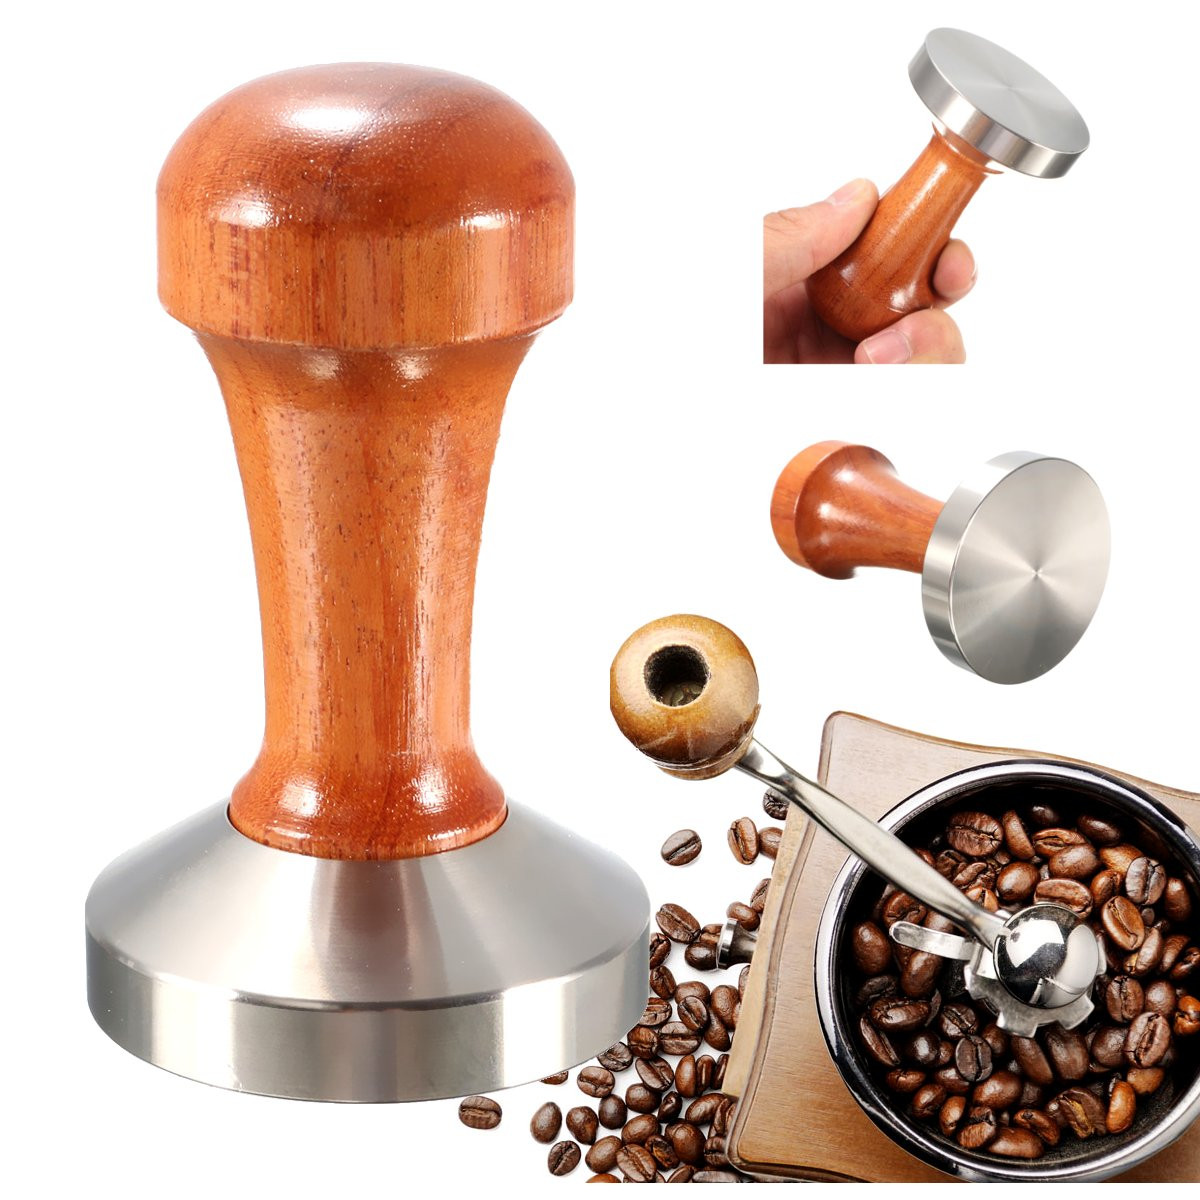 53mm-Stainless-Steel-Cafe-Coffee-Tamper-Bean-Press-for-Espresso-Flat-Base-Wooden-Handle-1170307-5